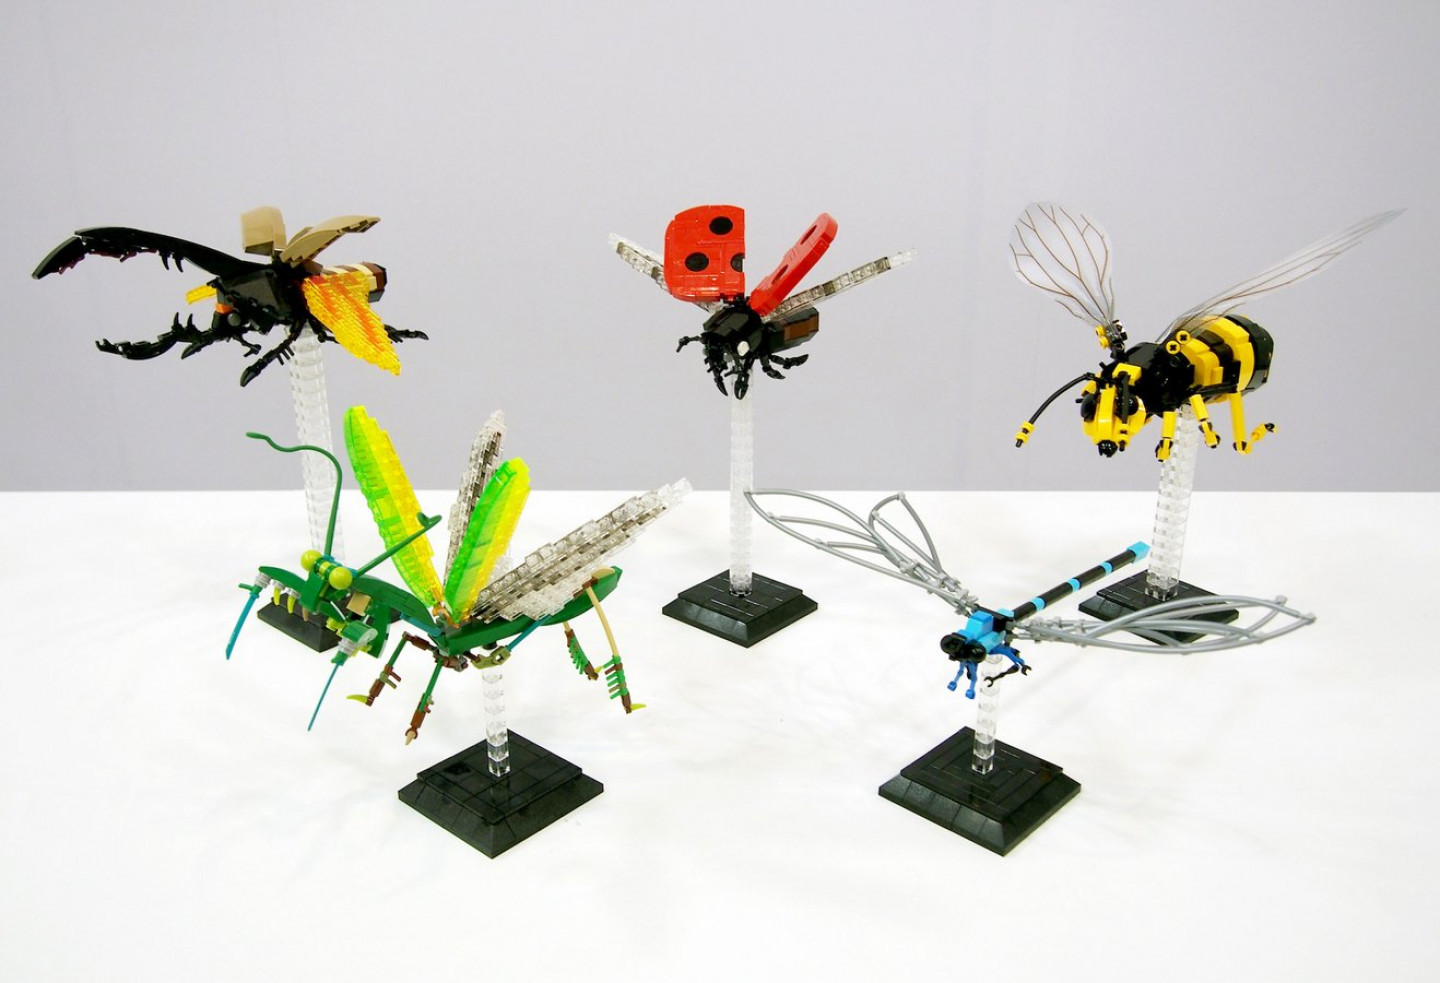 Ontdek LEGO Ideas 21342: The Insect Collection